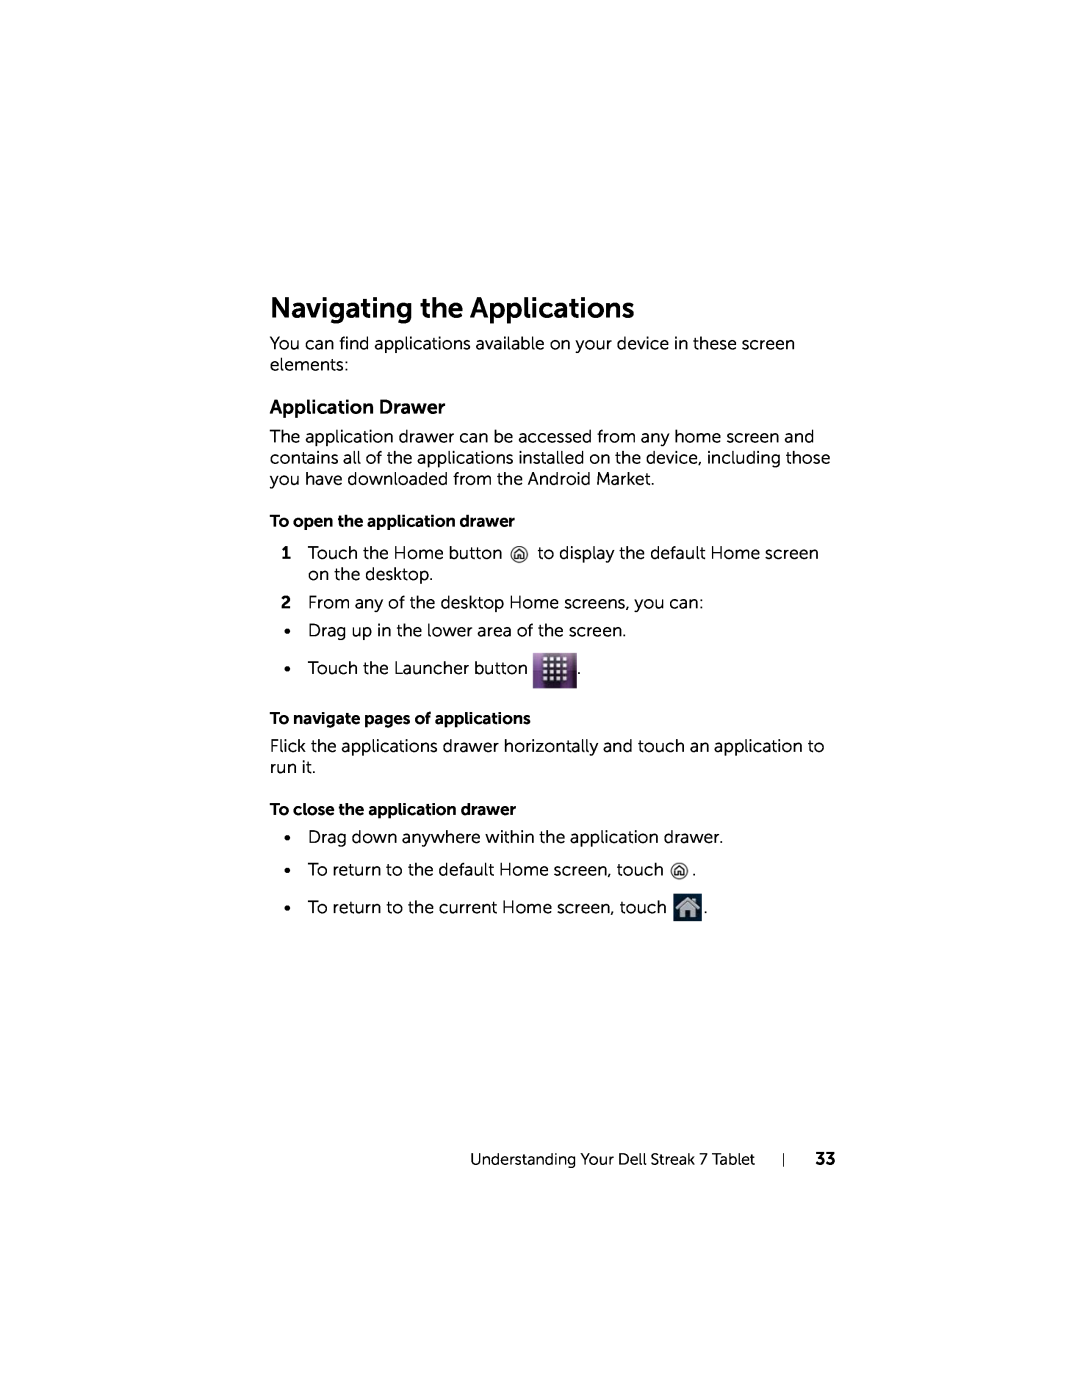 Dell 7 user manual Navigating the Applications, Application Drawer 